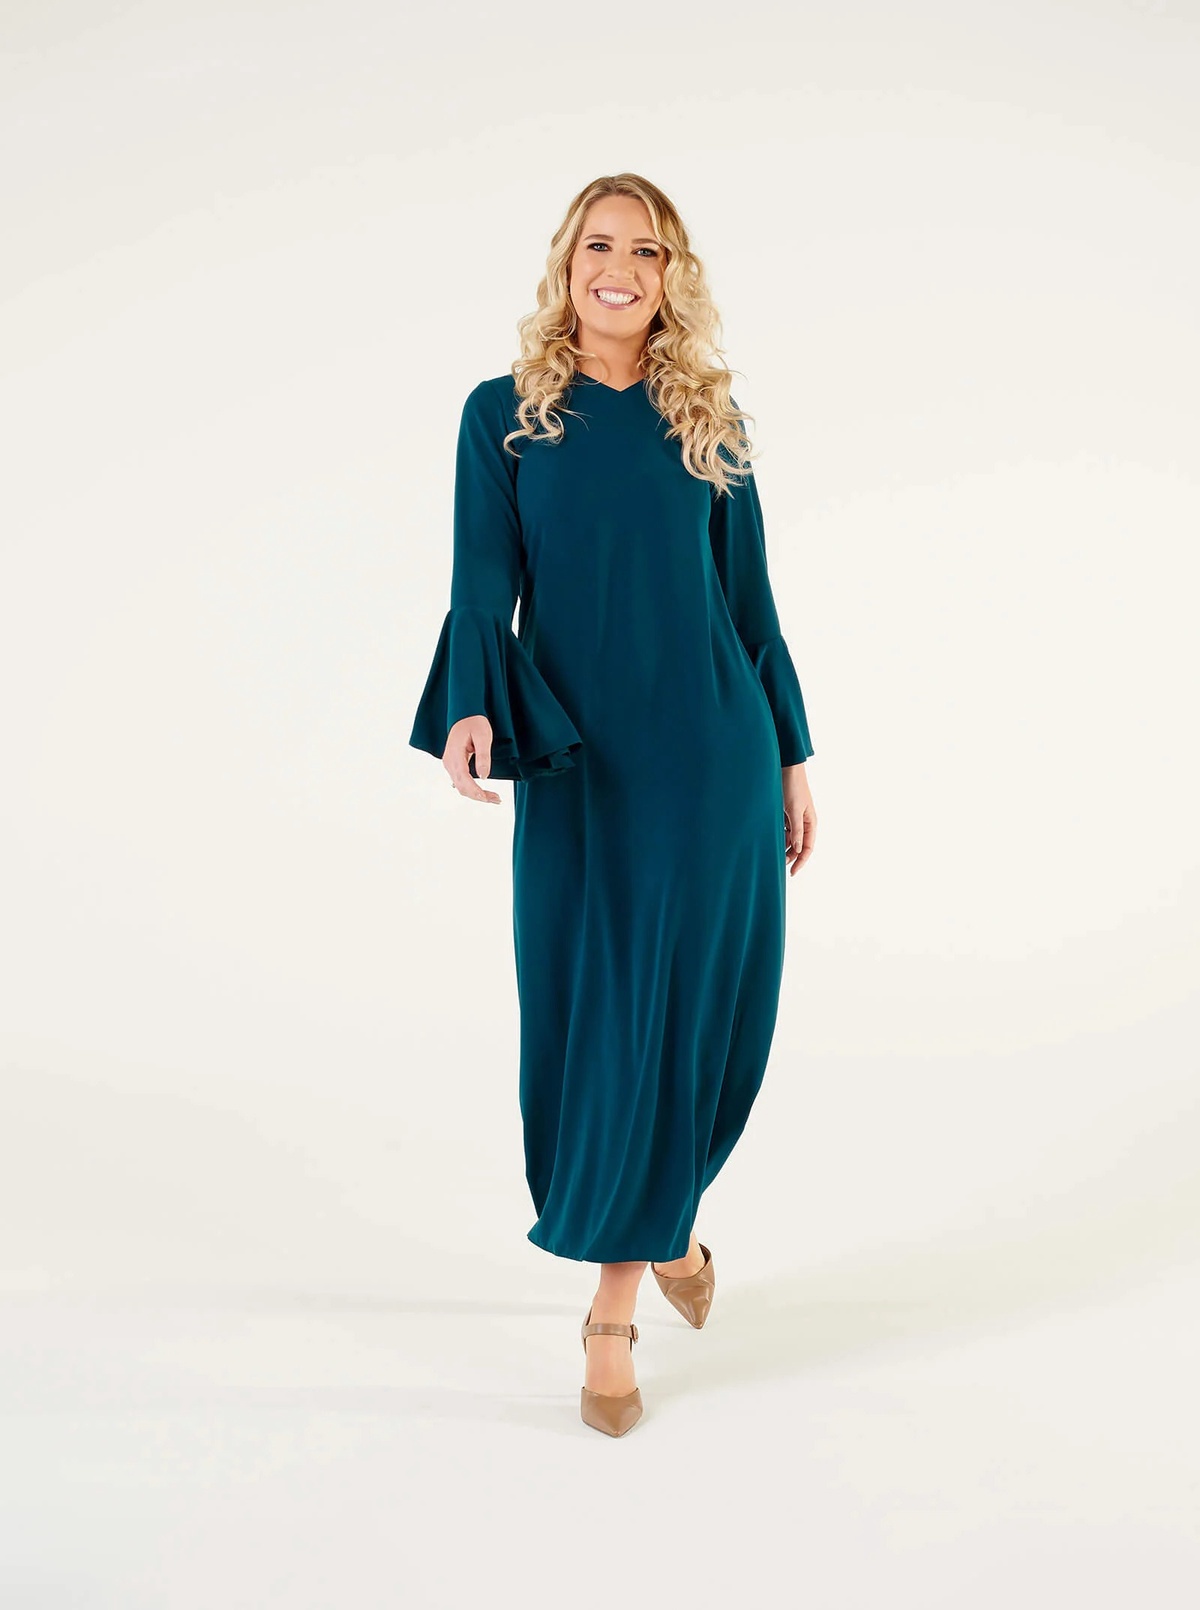 The Elegance of Modest Floral Dresses and Embroidered Designs in the Long Sleeve Maxi Dress Trend"